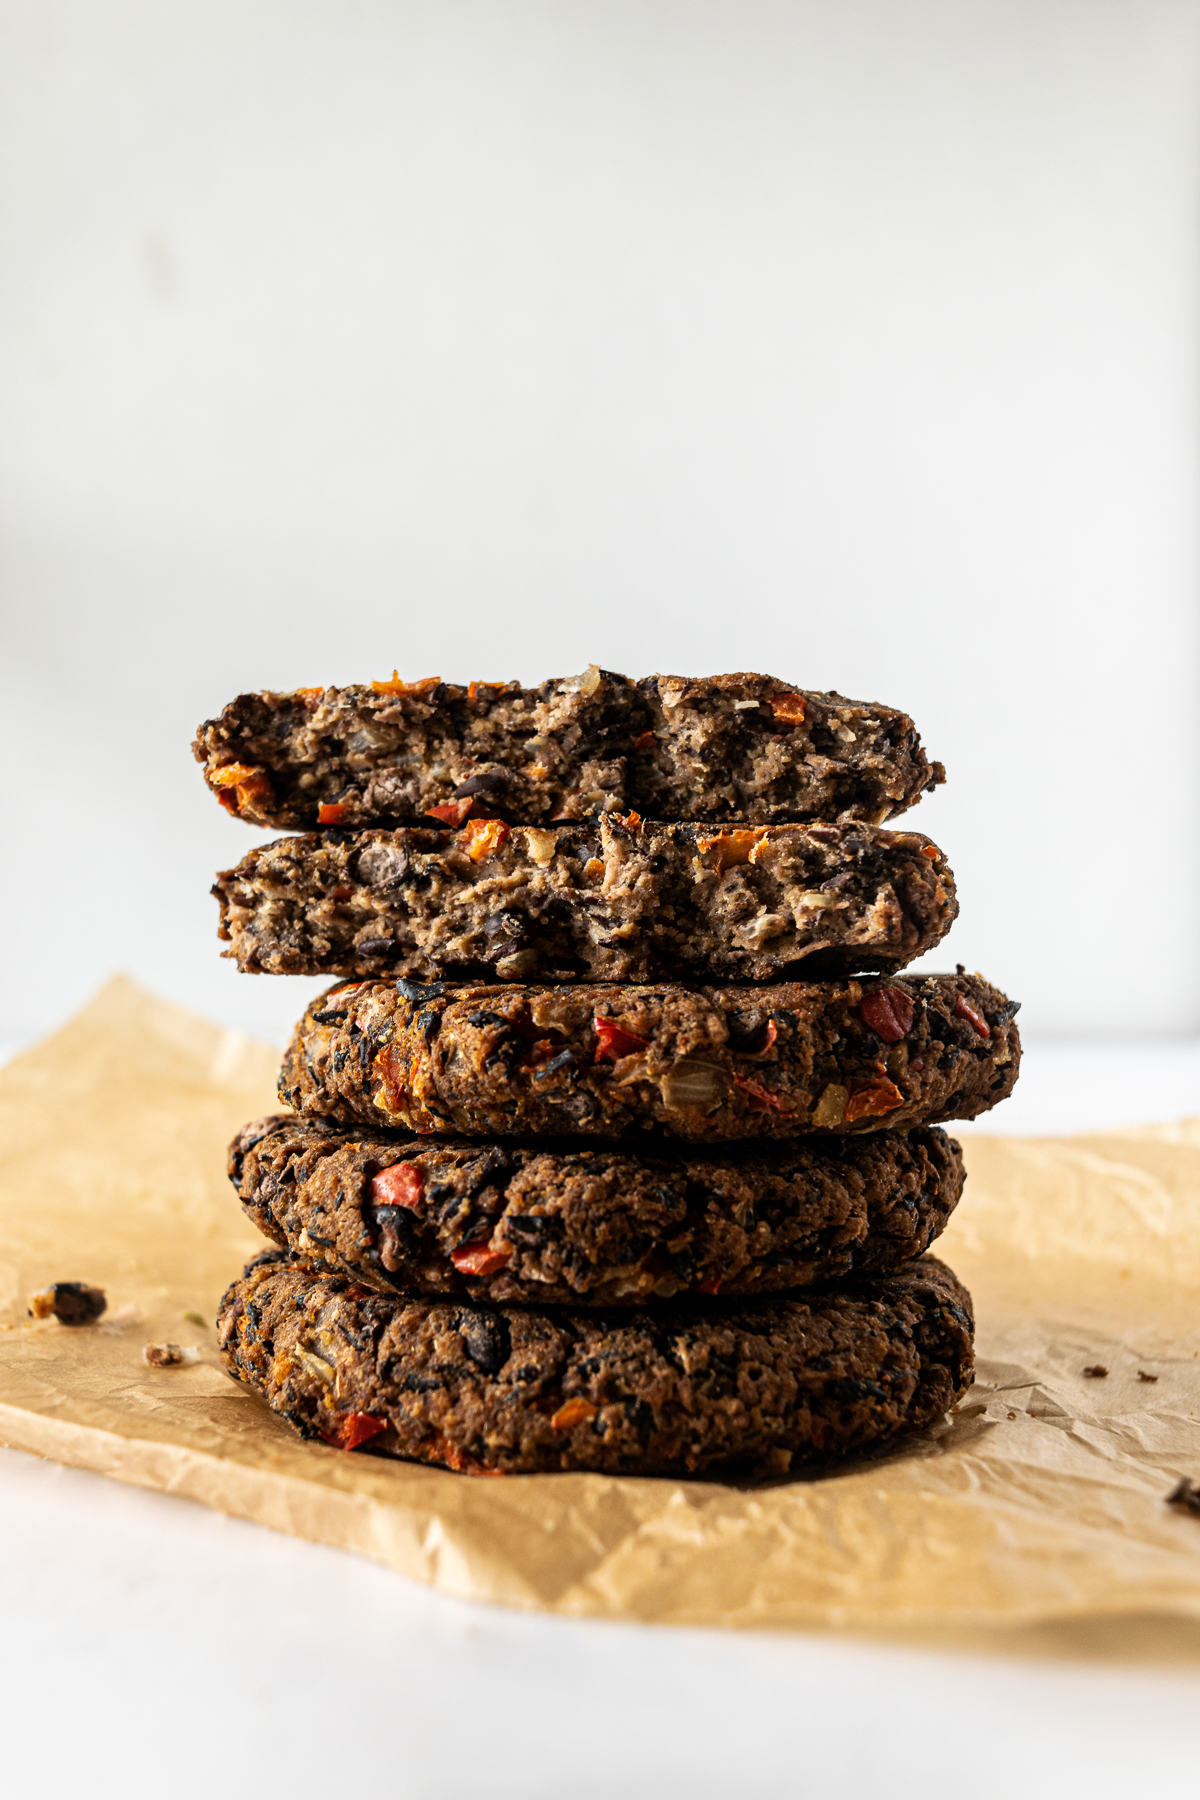 stacked black bean burgers on parchment paper.